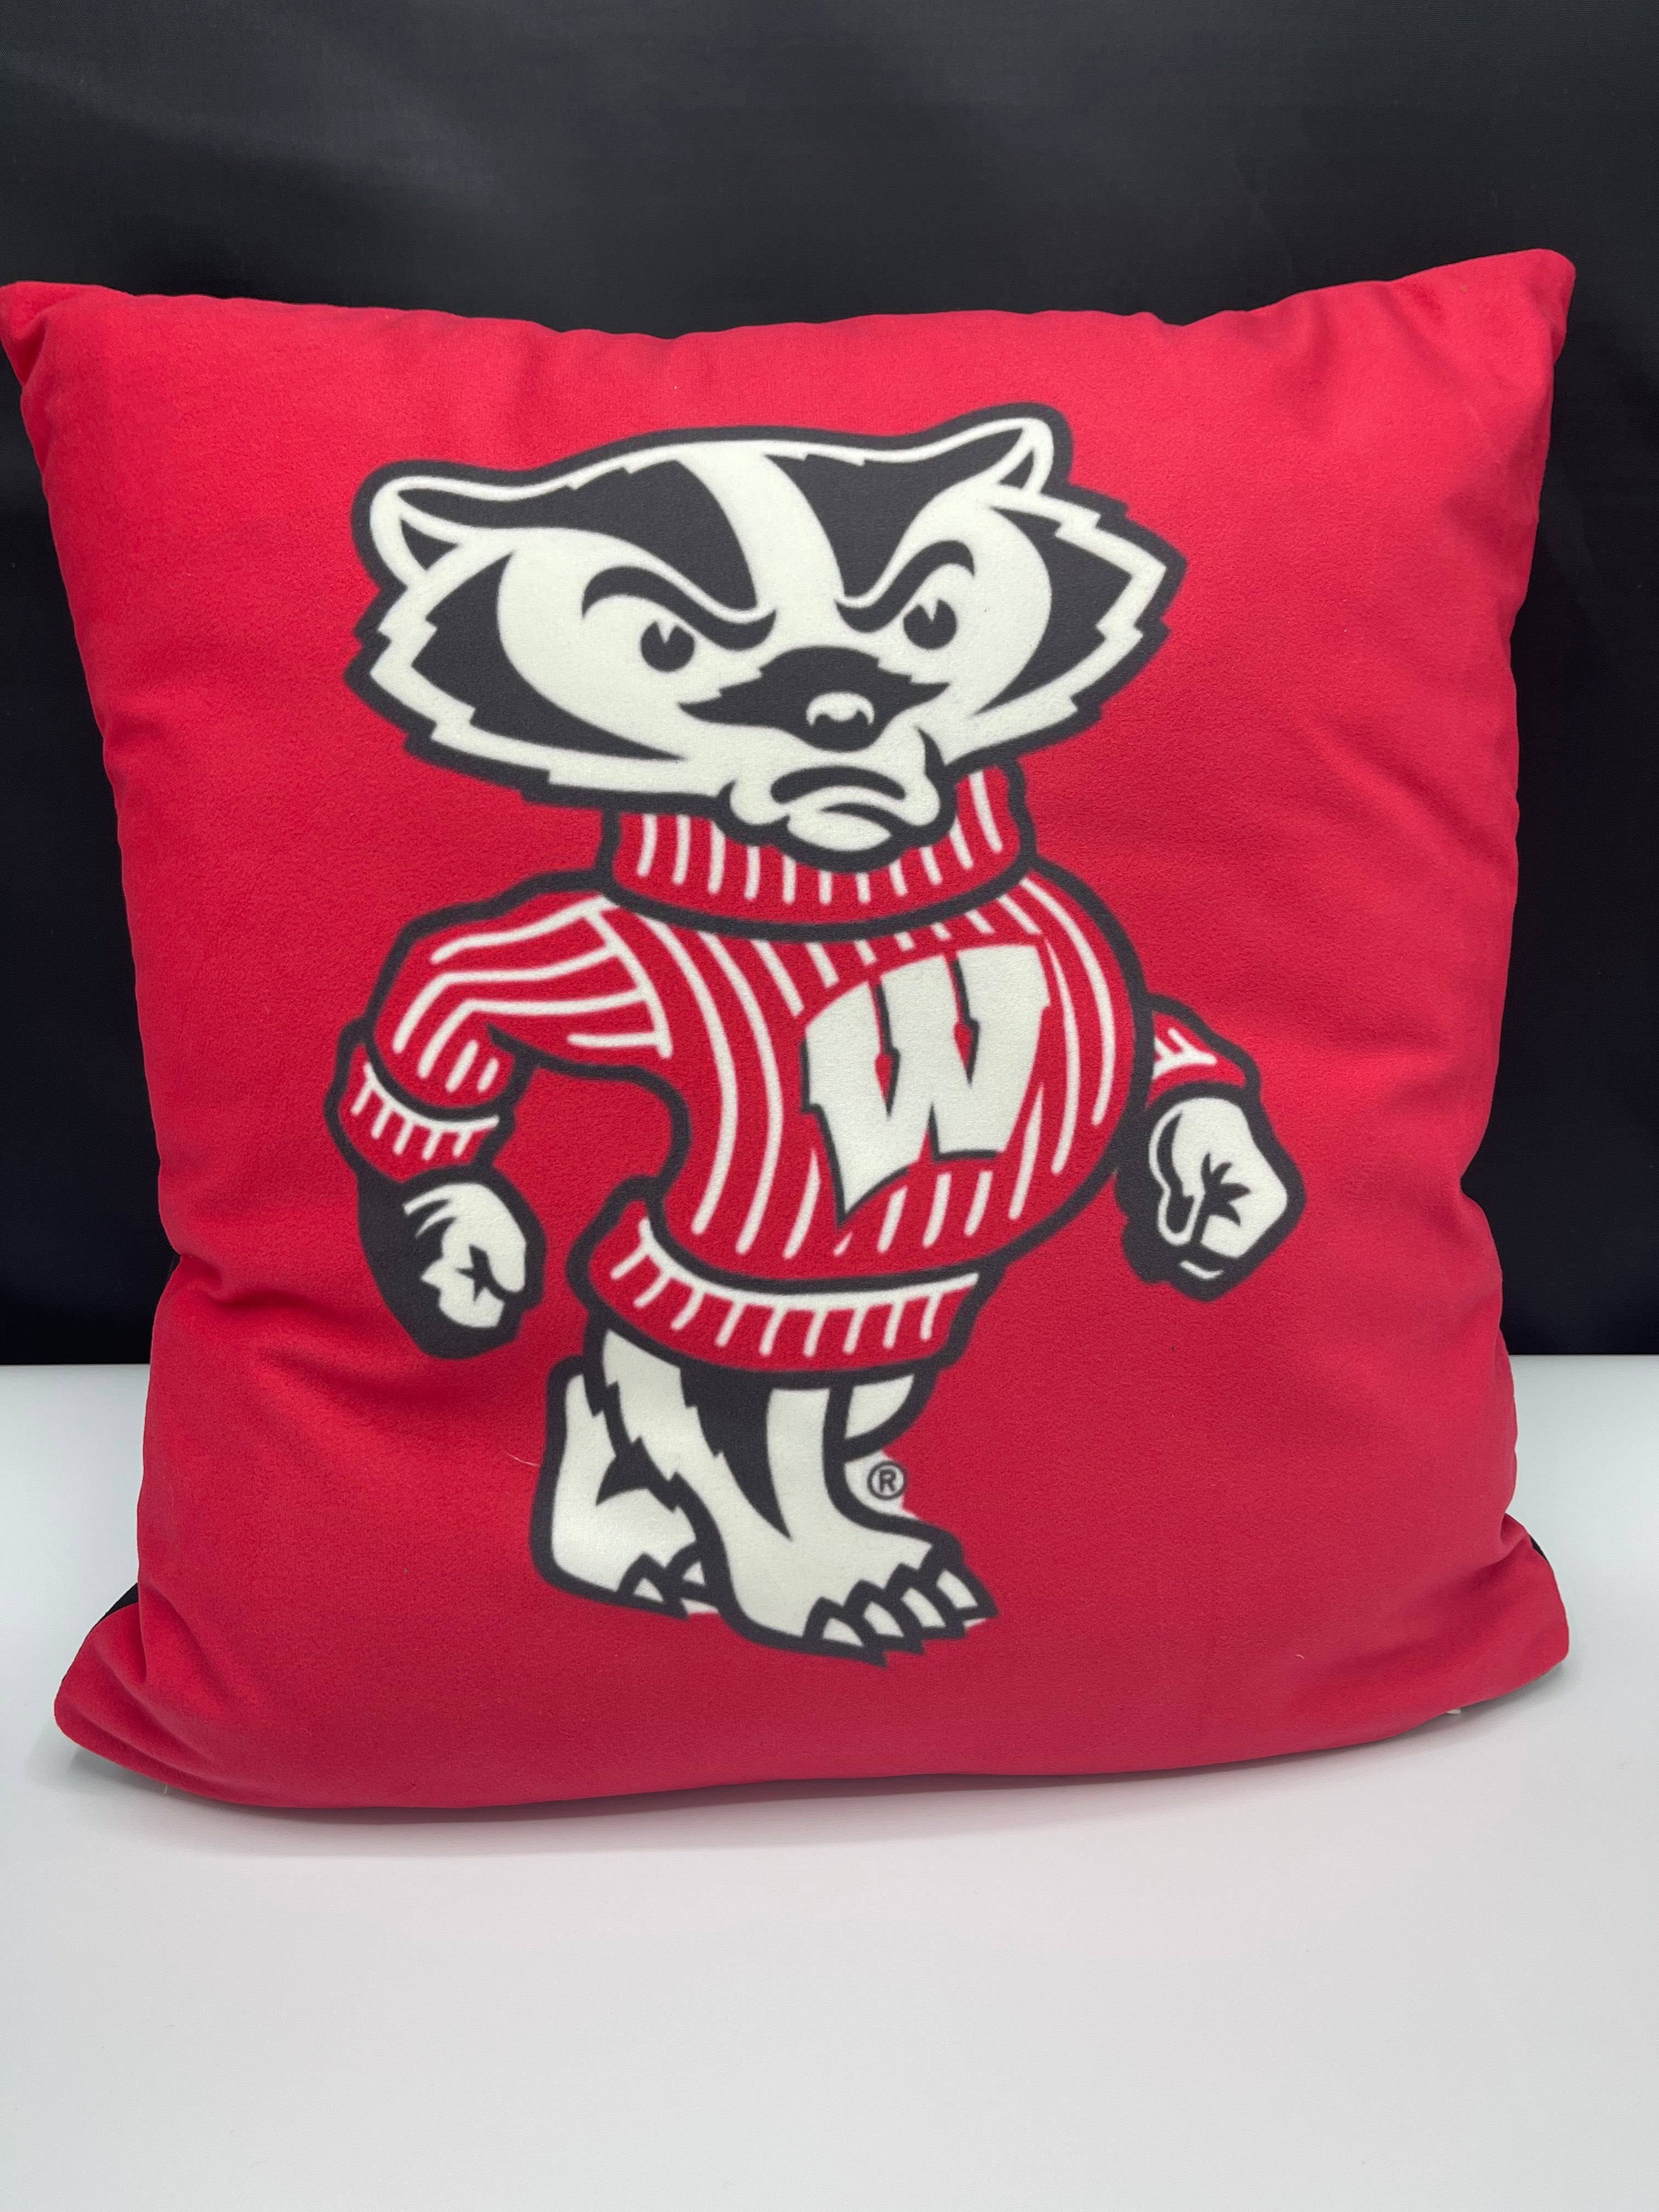 COLLEGE FAUX SUEDE PILLOW - 4 SIZES